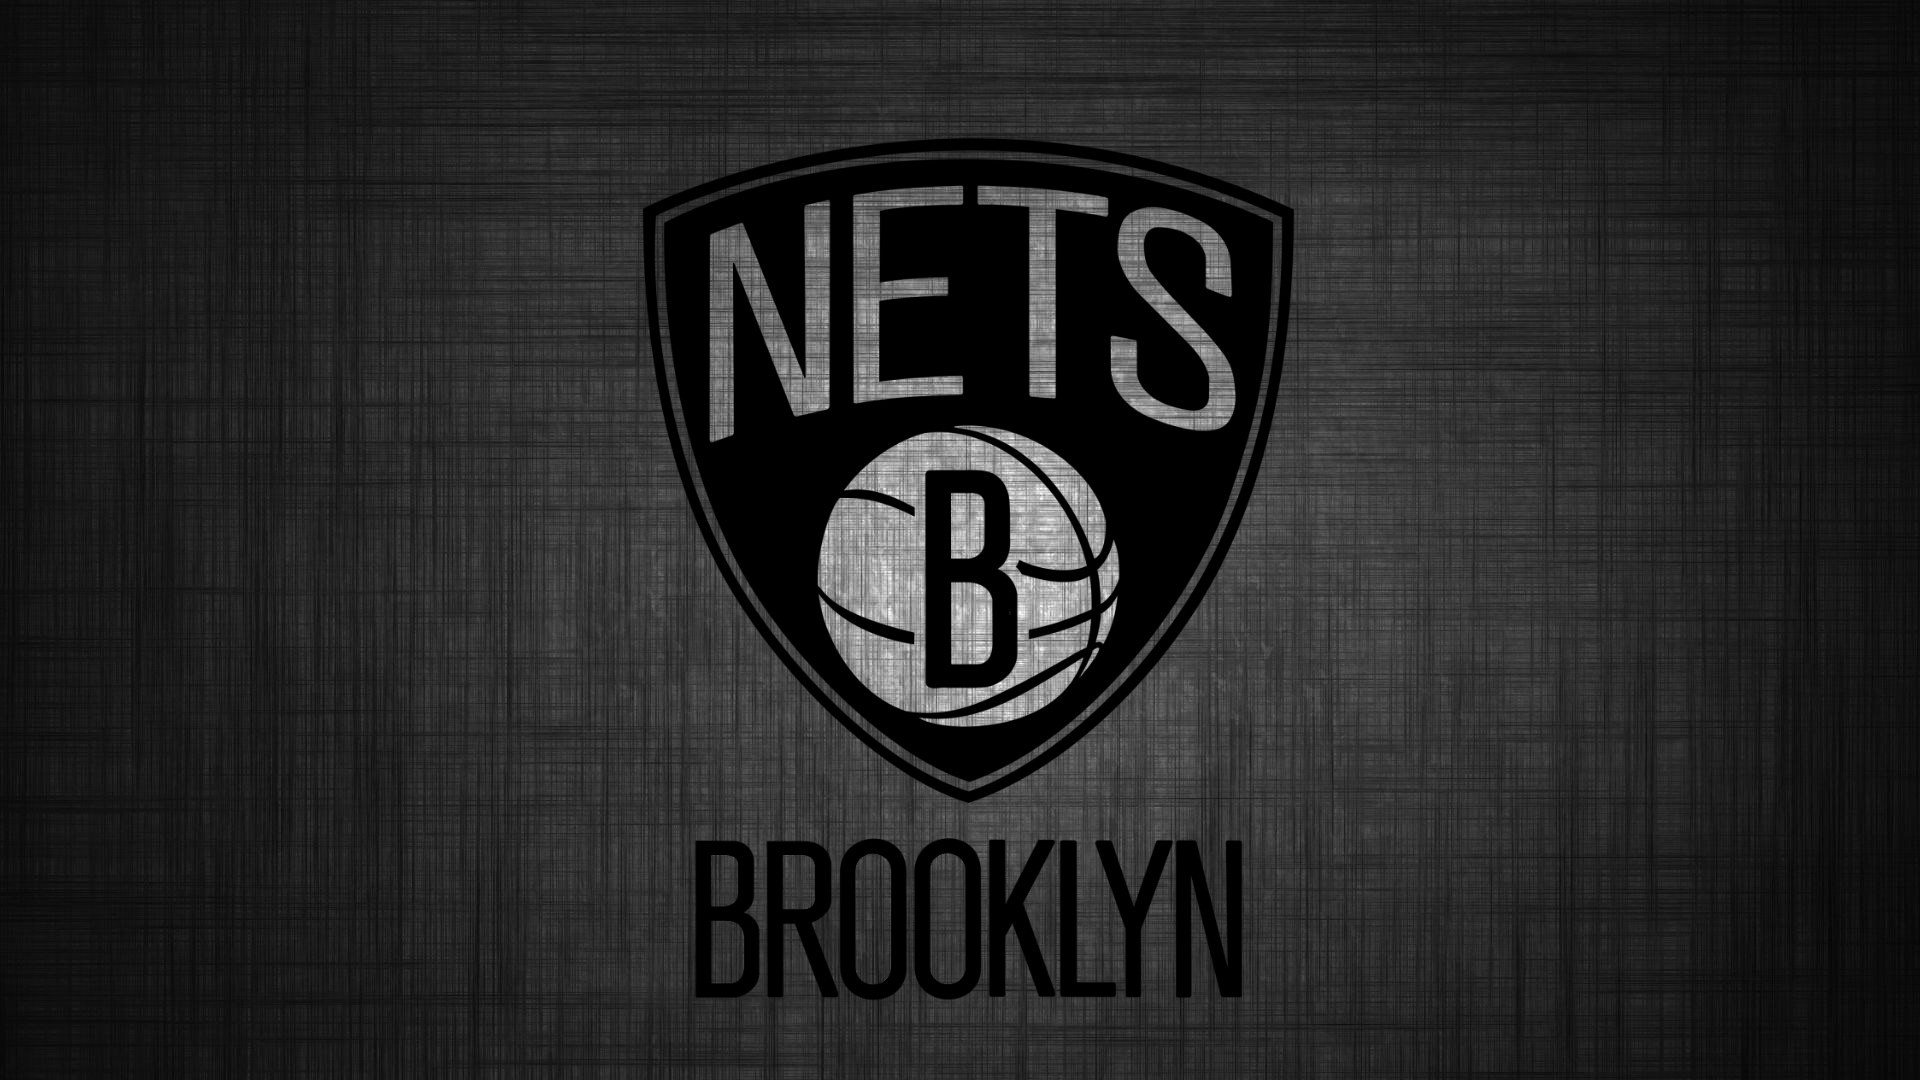 Wallpapers HD Brooklyn Nets with image dimensions 1920x1080 pixel. You can make this wallpaper for your Desktop Computer Backgrounds, Windows or Mac Screensavers, iPhone Lock screen, Tablet or Android and another Mobile Phone device